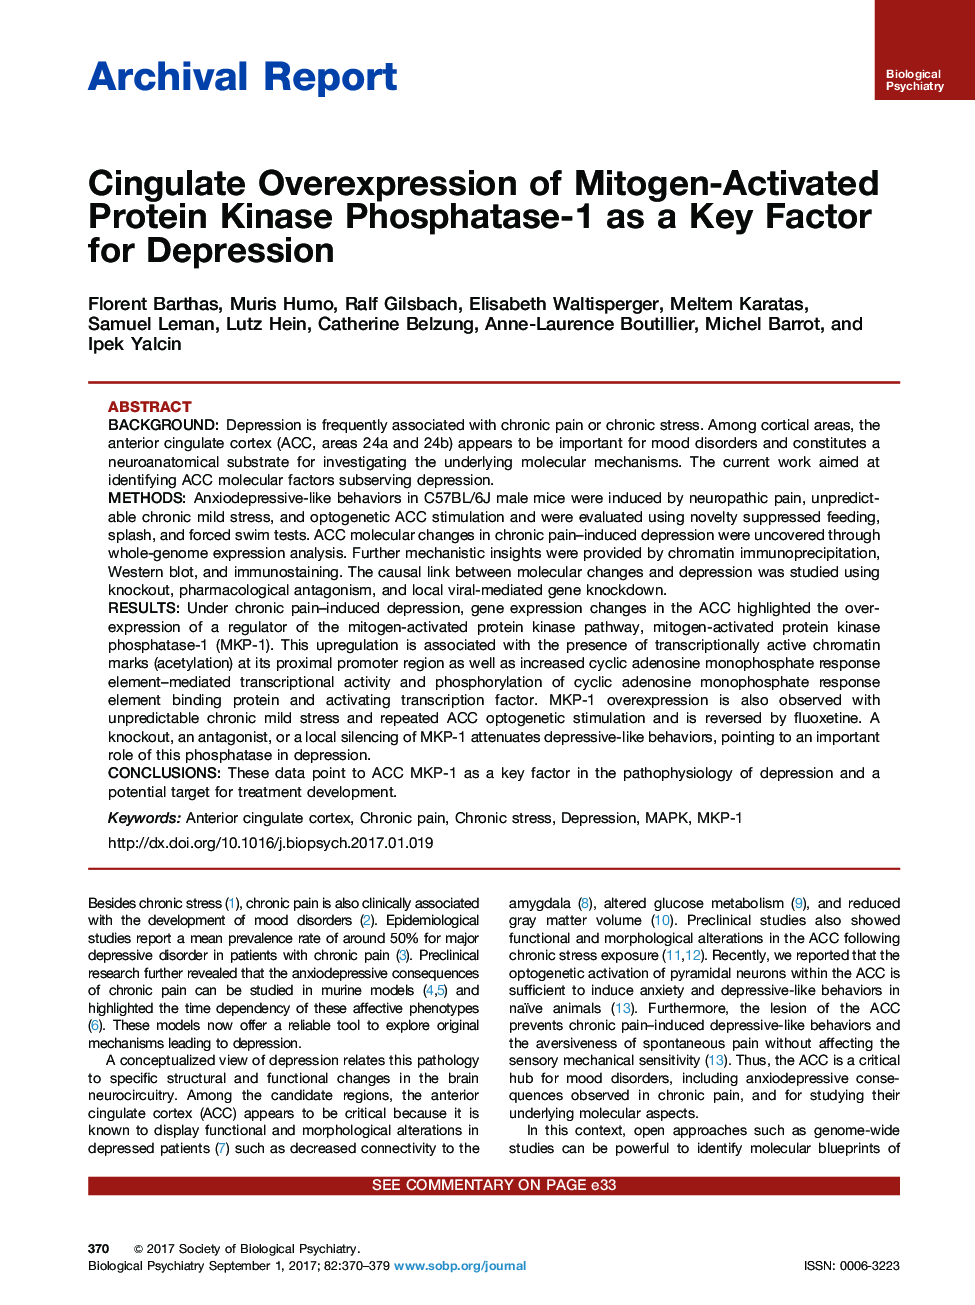 Archival ReportCingulate Overexpression of Mitogen-Activated Protein Kinase Phosphatase-1 as a Key Factor for Depression